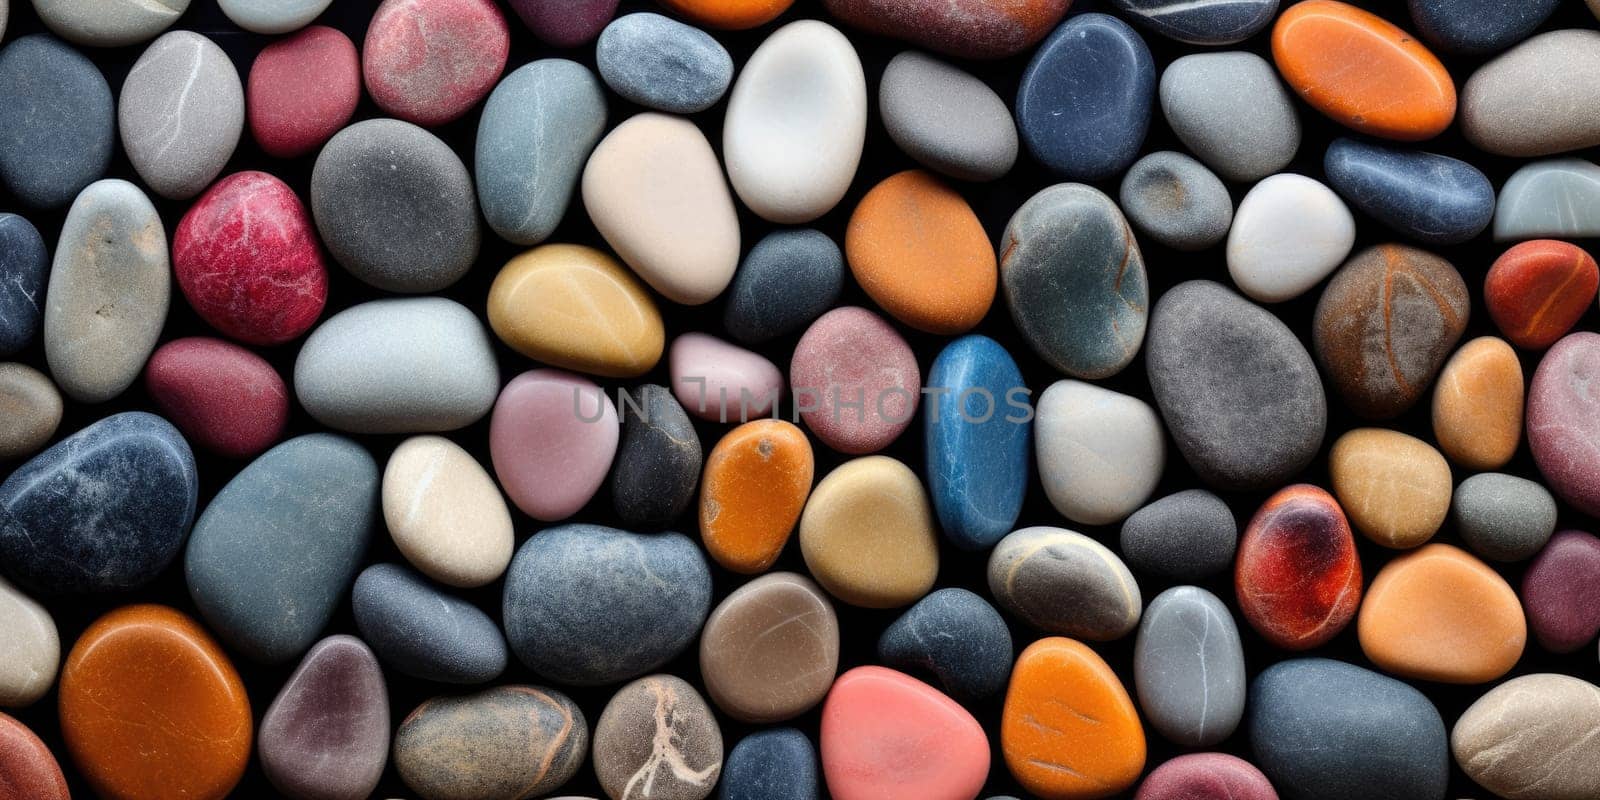 Colorful pebbles stones as texture or background by Kadula